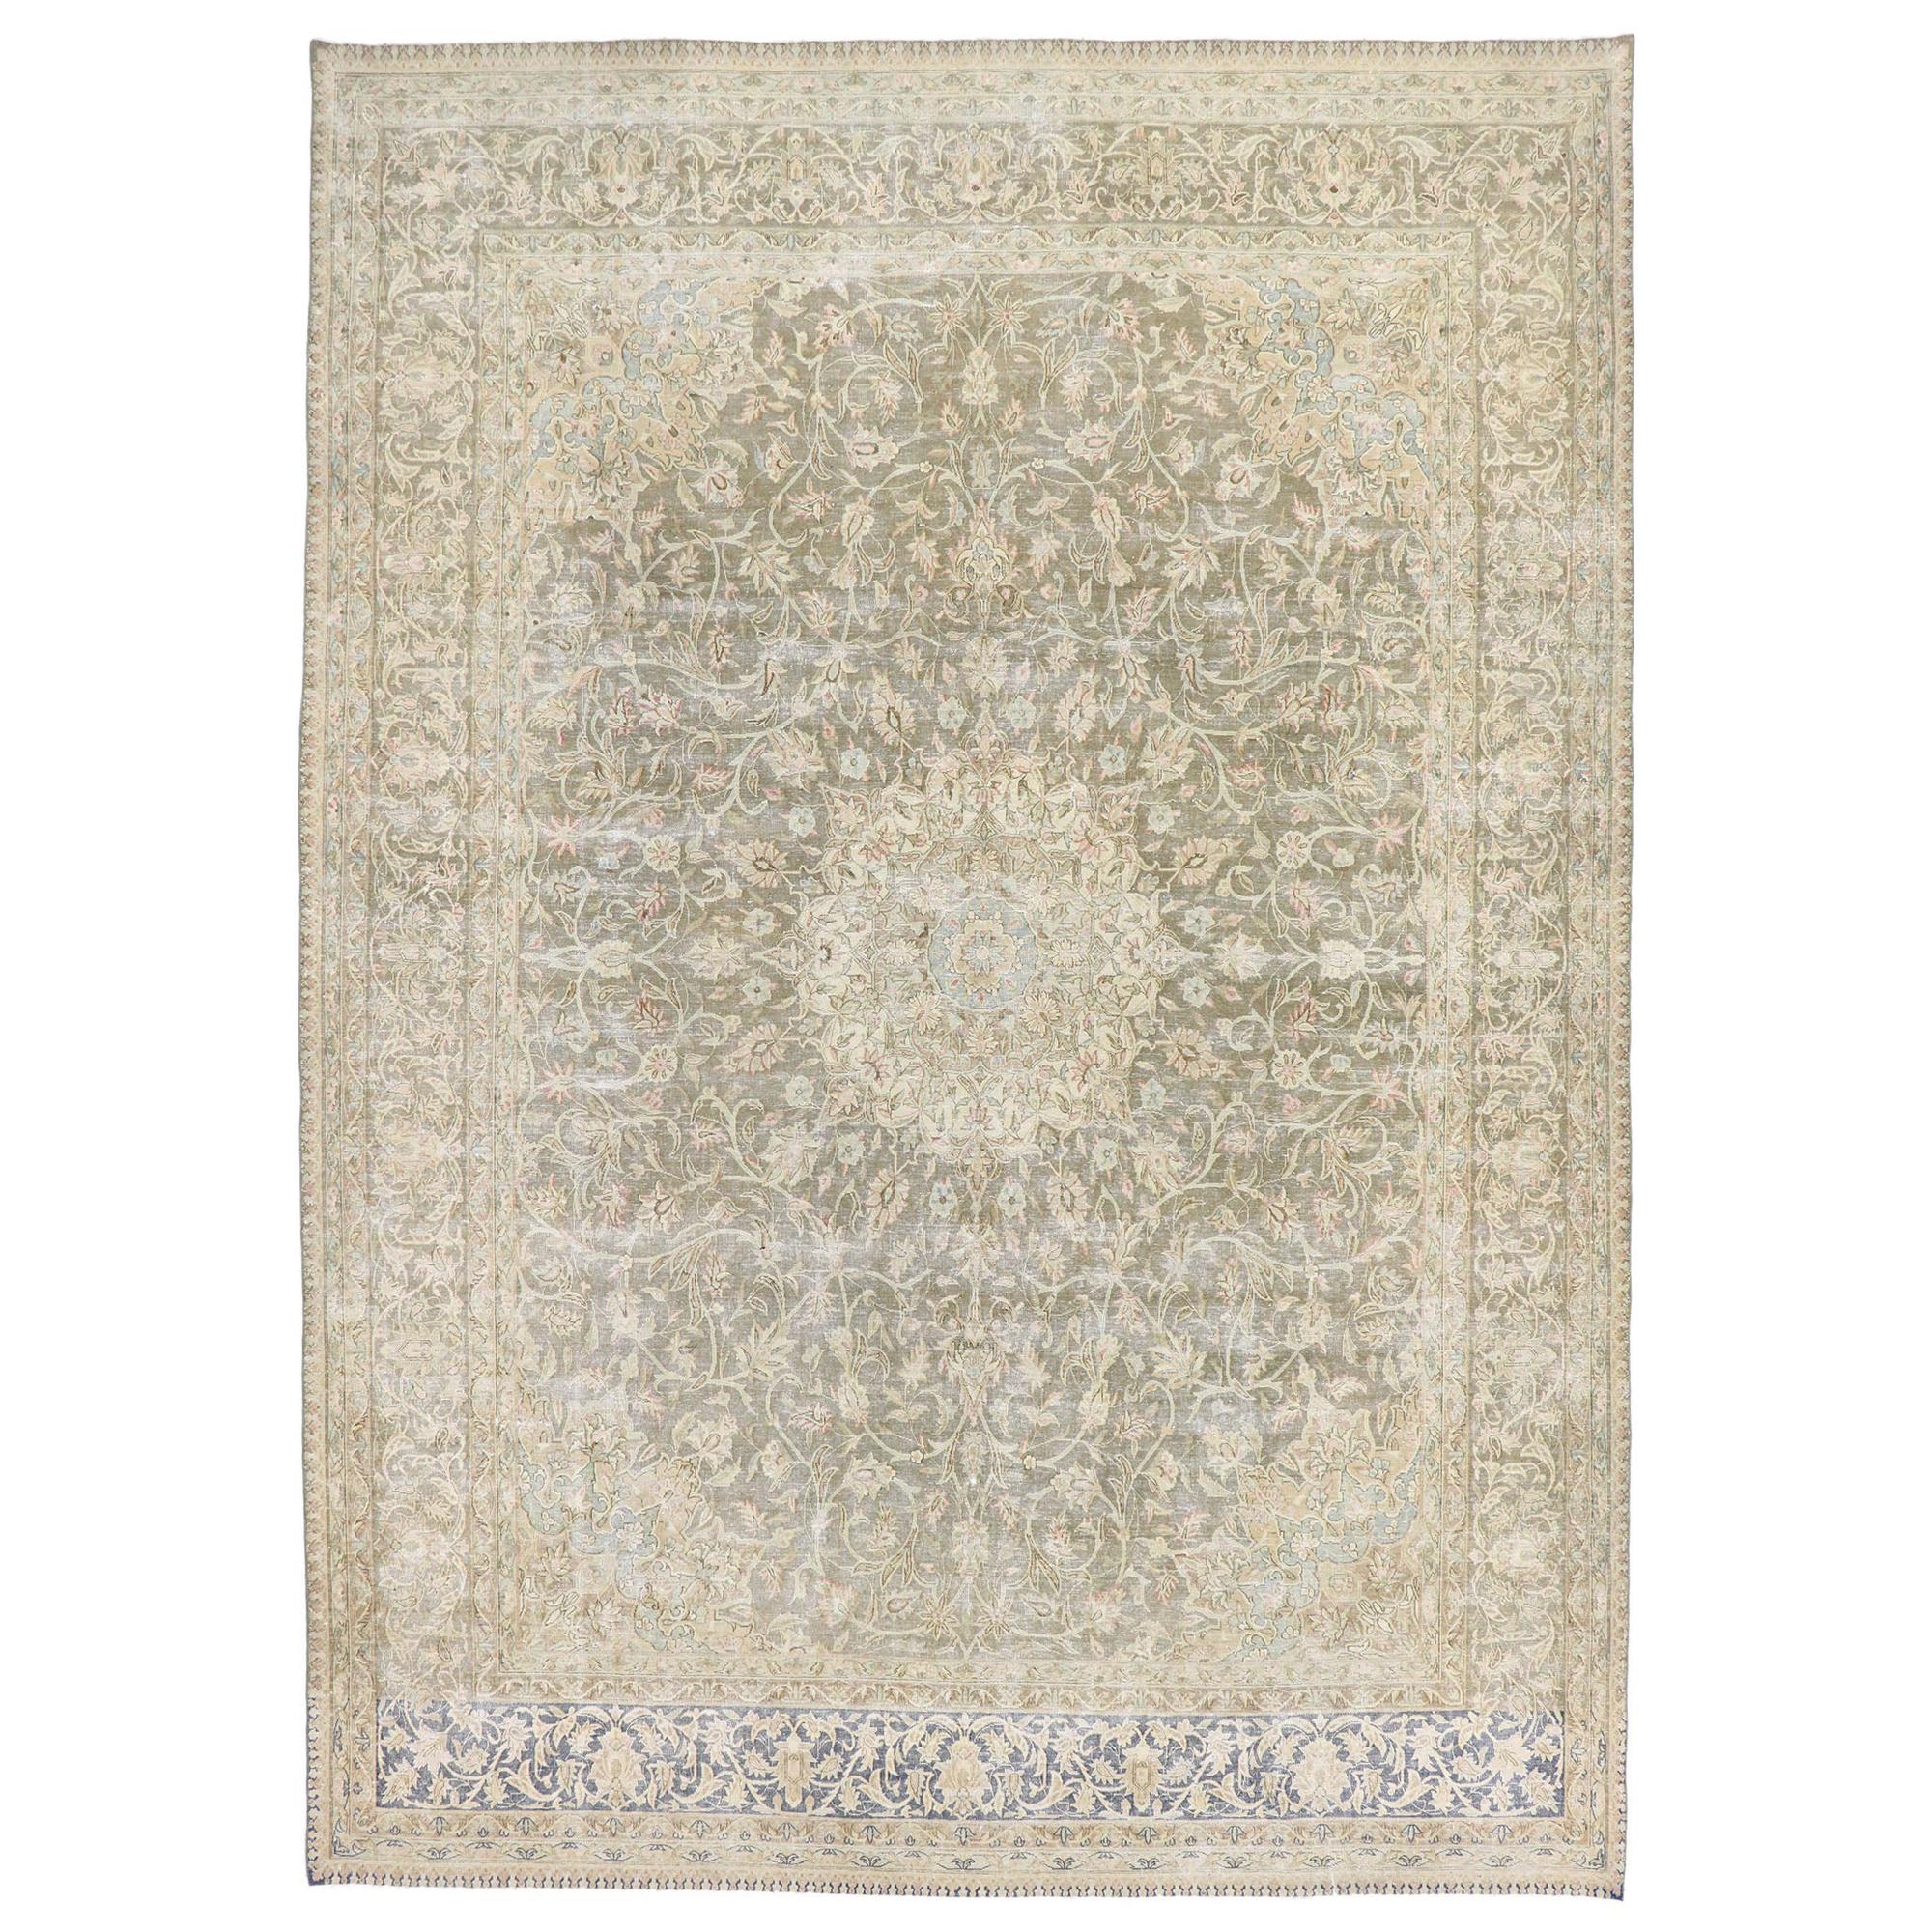 Distressed Antique Persian Kerman Rug with Rustic French Country Style For Sale